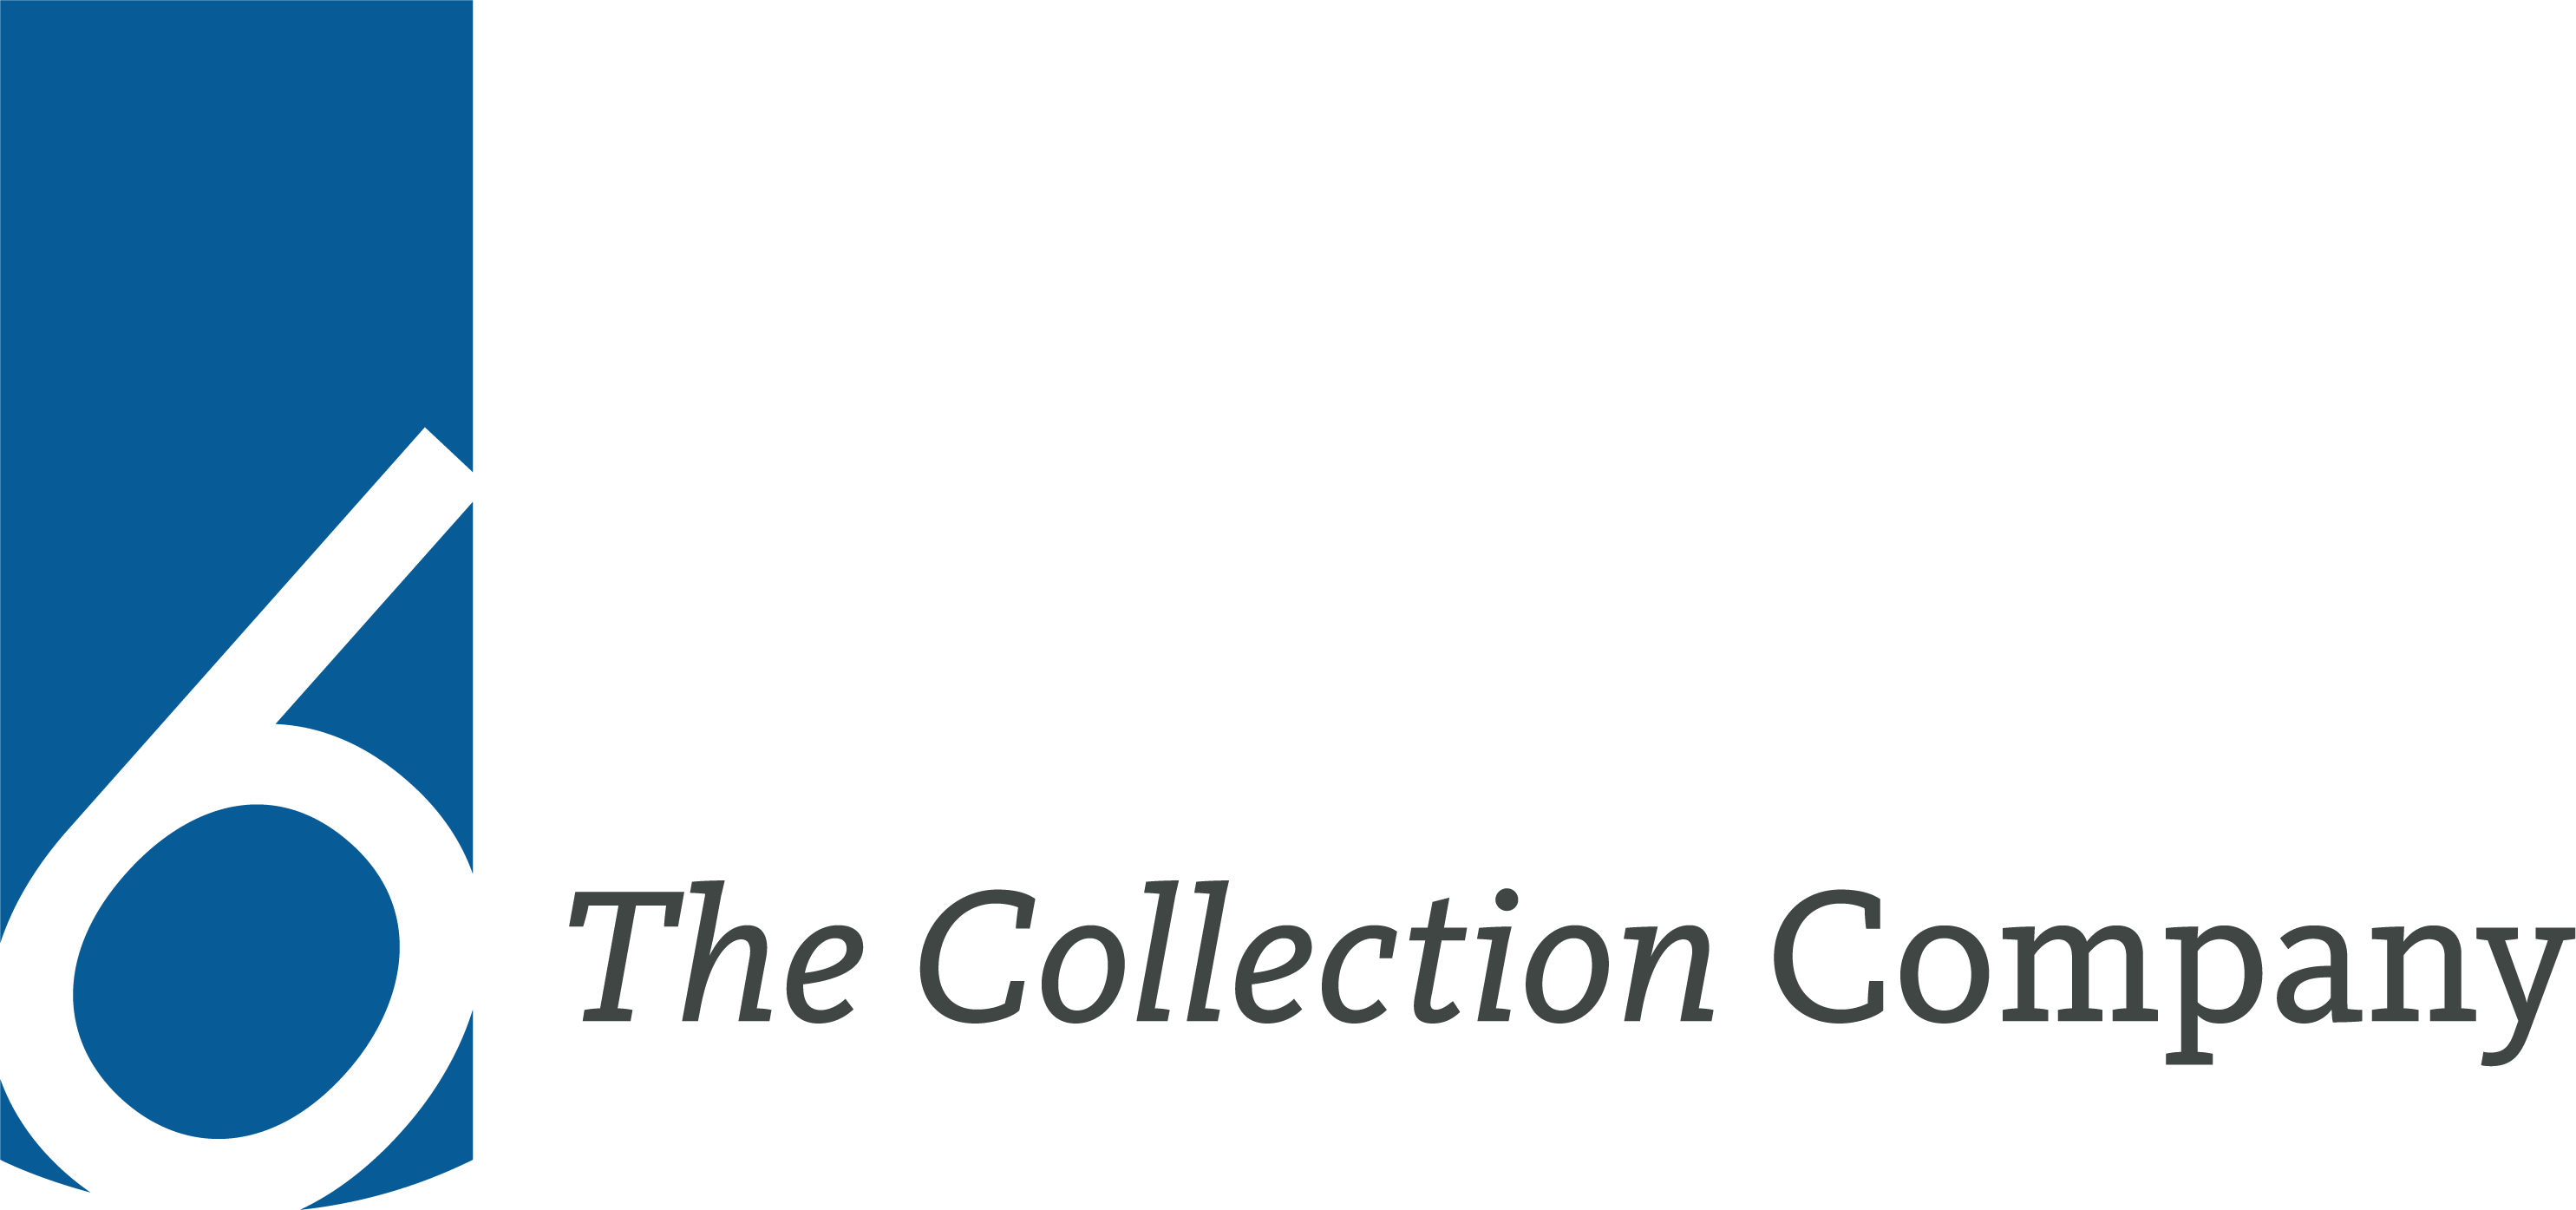 The Collection Company